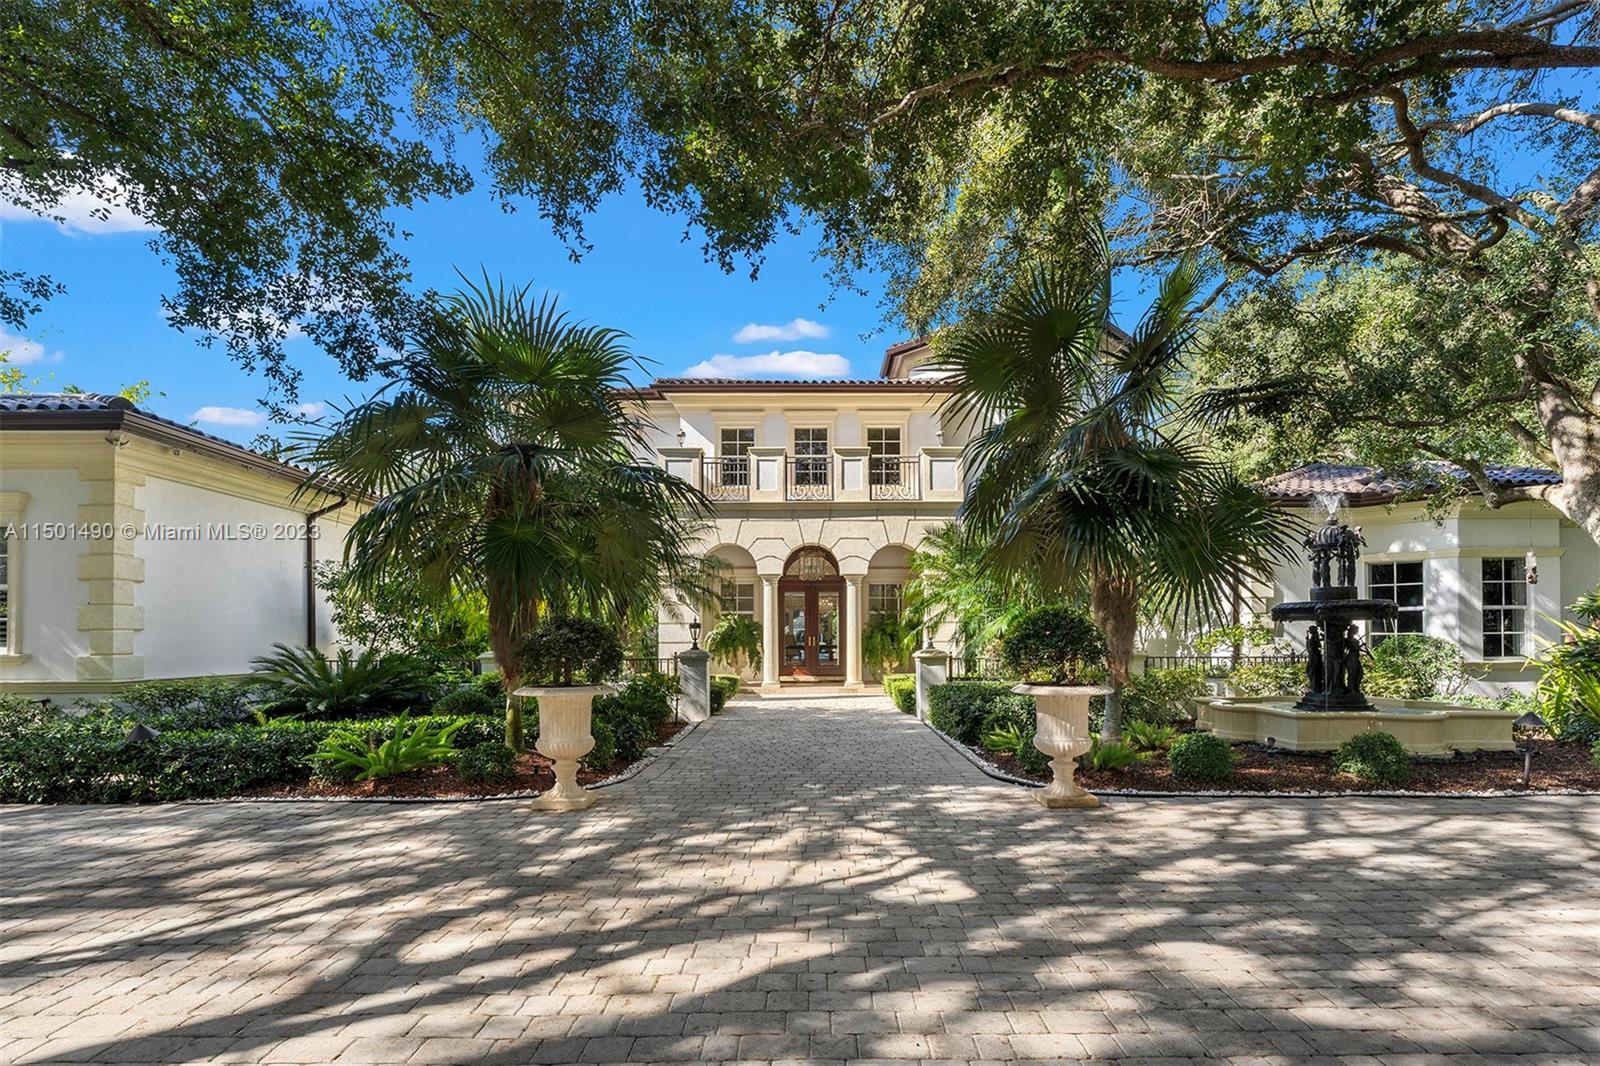 Exceptional N Pinecrest estate! Custom Mediterranean home on 1.15 acres, w/ 8 beds & 8/1 baths. This stunning residence boasts a grand entrance framed by oak trees & radiant landscaping w/ a fountain. The interior exudes elegance with a two-story layout including a spacious kitchen, top tier appliances, breakfast nook, & ground level luxurious primary suite with a sitting room, dual closets, massage rm, and private terrace.  Marble & wd flooring enhances the opulence. Additional highlights encompass a gym, game room, wine cellar, sauna, dual maids’ quarters, smart home integration, city water, & sound systems. 3 car garage w/ 1 car lift.  The resort-style backyard beckons with a large pool and jacuzzi. This unique estate epitomizes sophistication & elegance. Premier Pinecrest Schools.